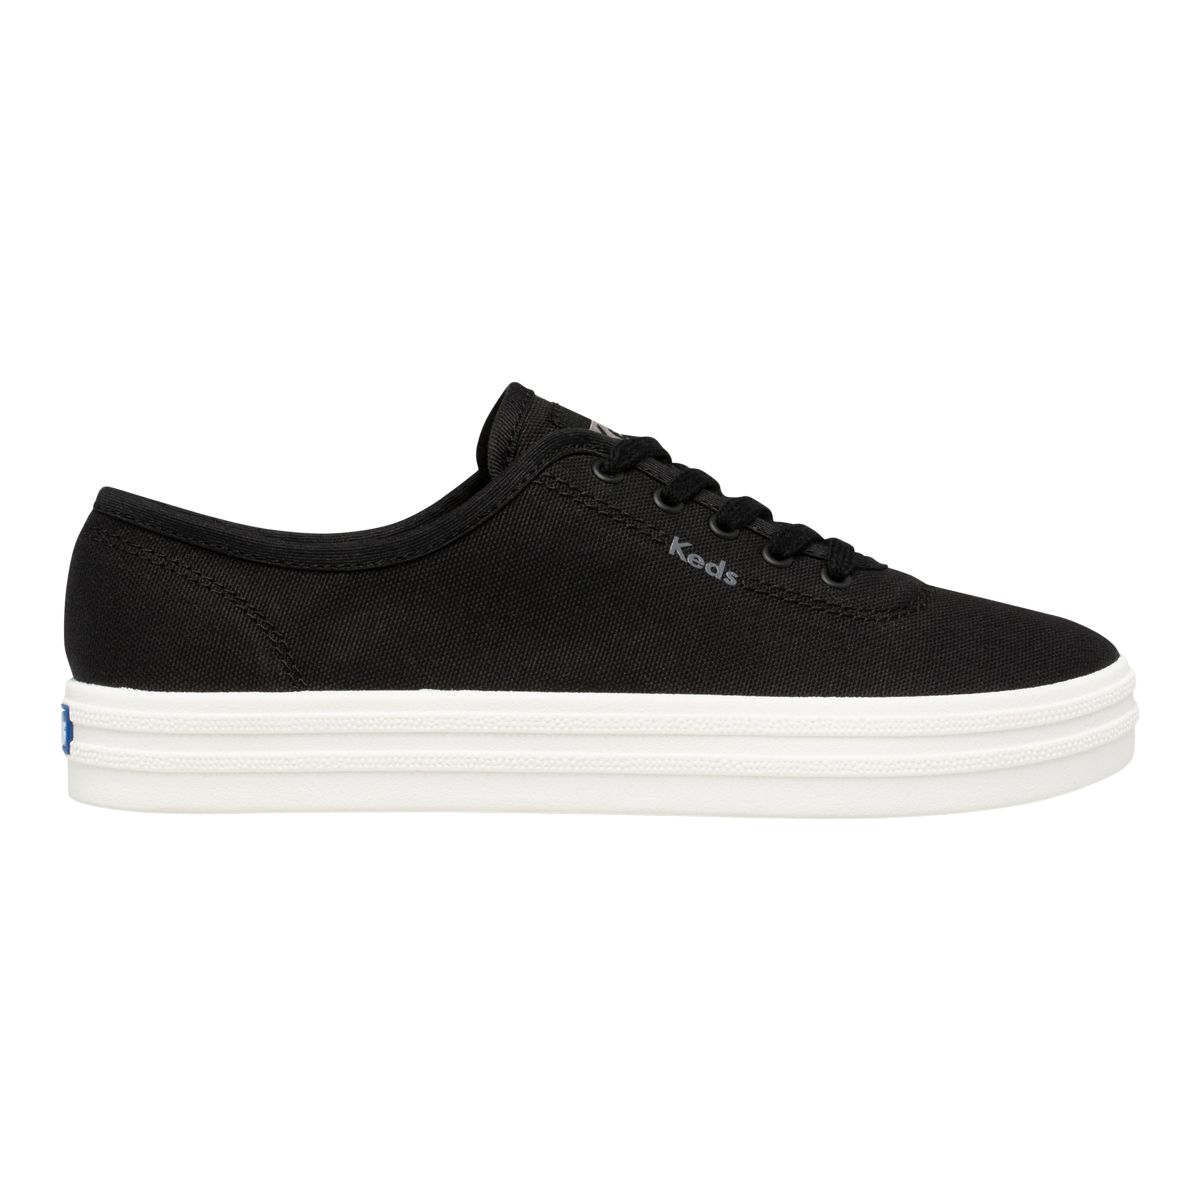 Image of Keds Women's Breezie Canvas Shoes Sneakers